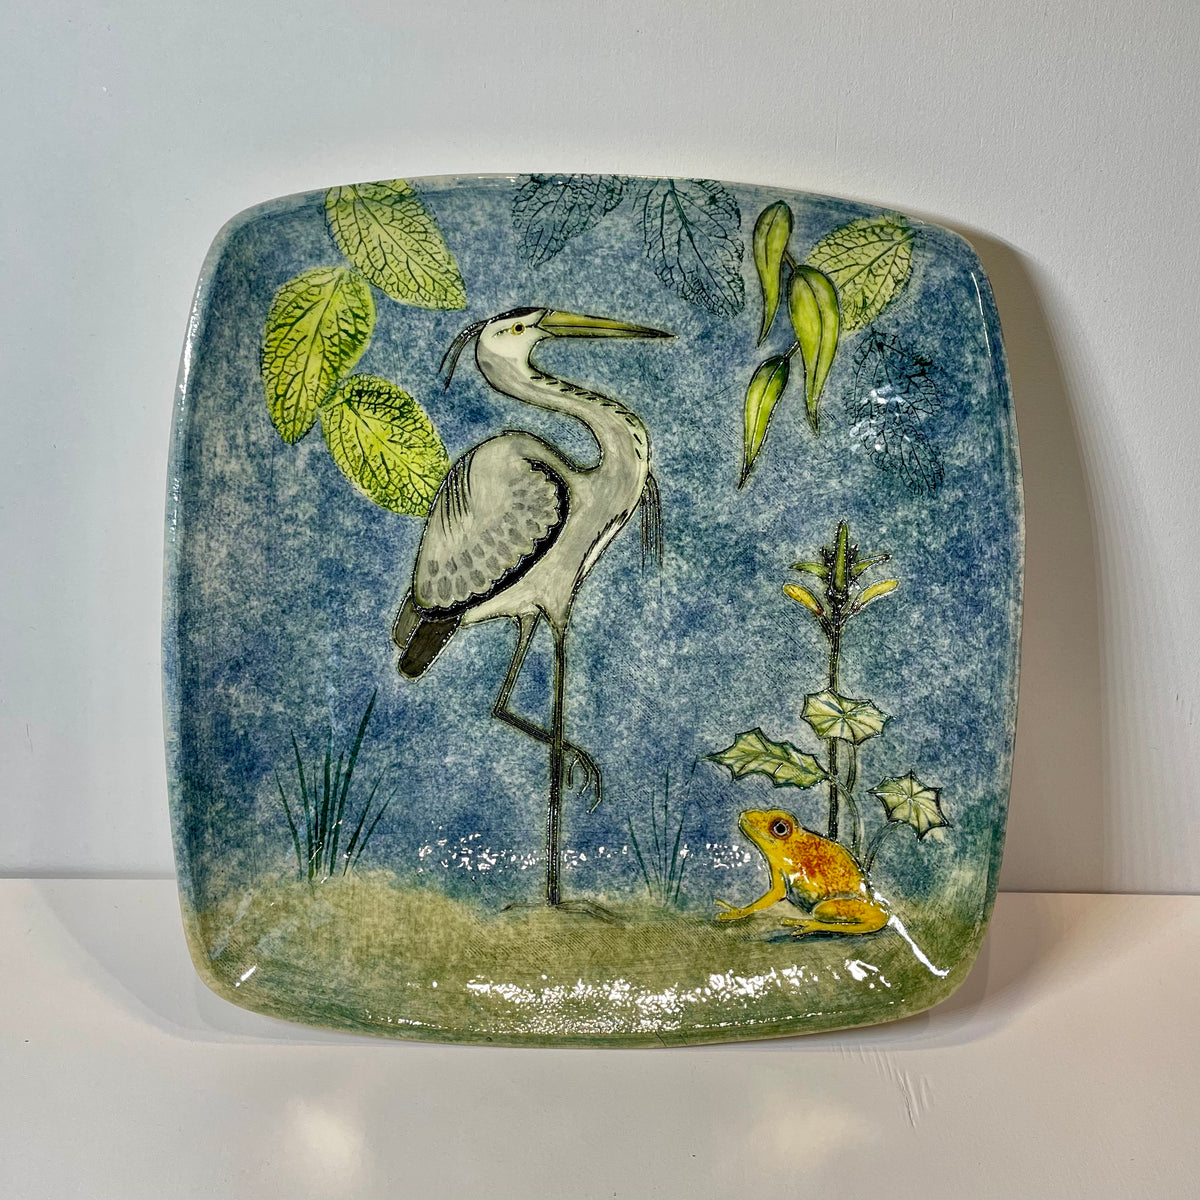 Square heron and frog dish by Jeanne Jackson